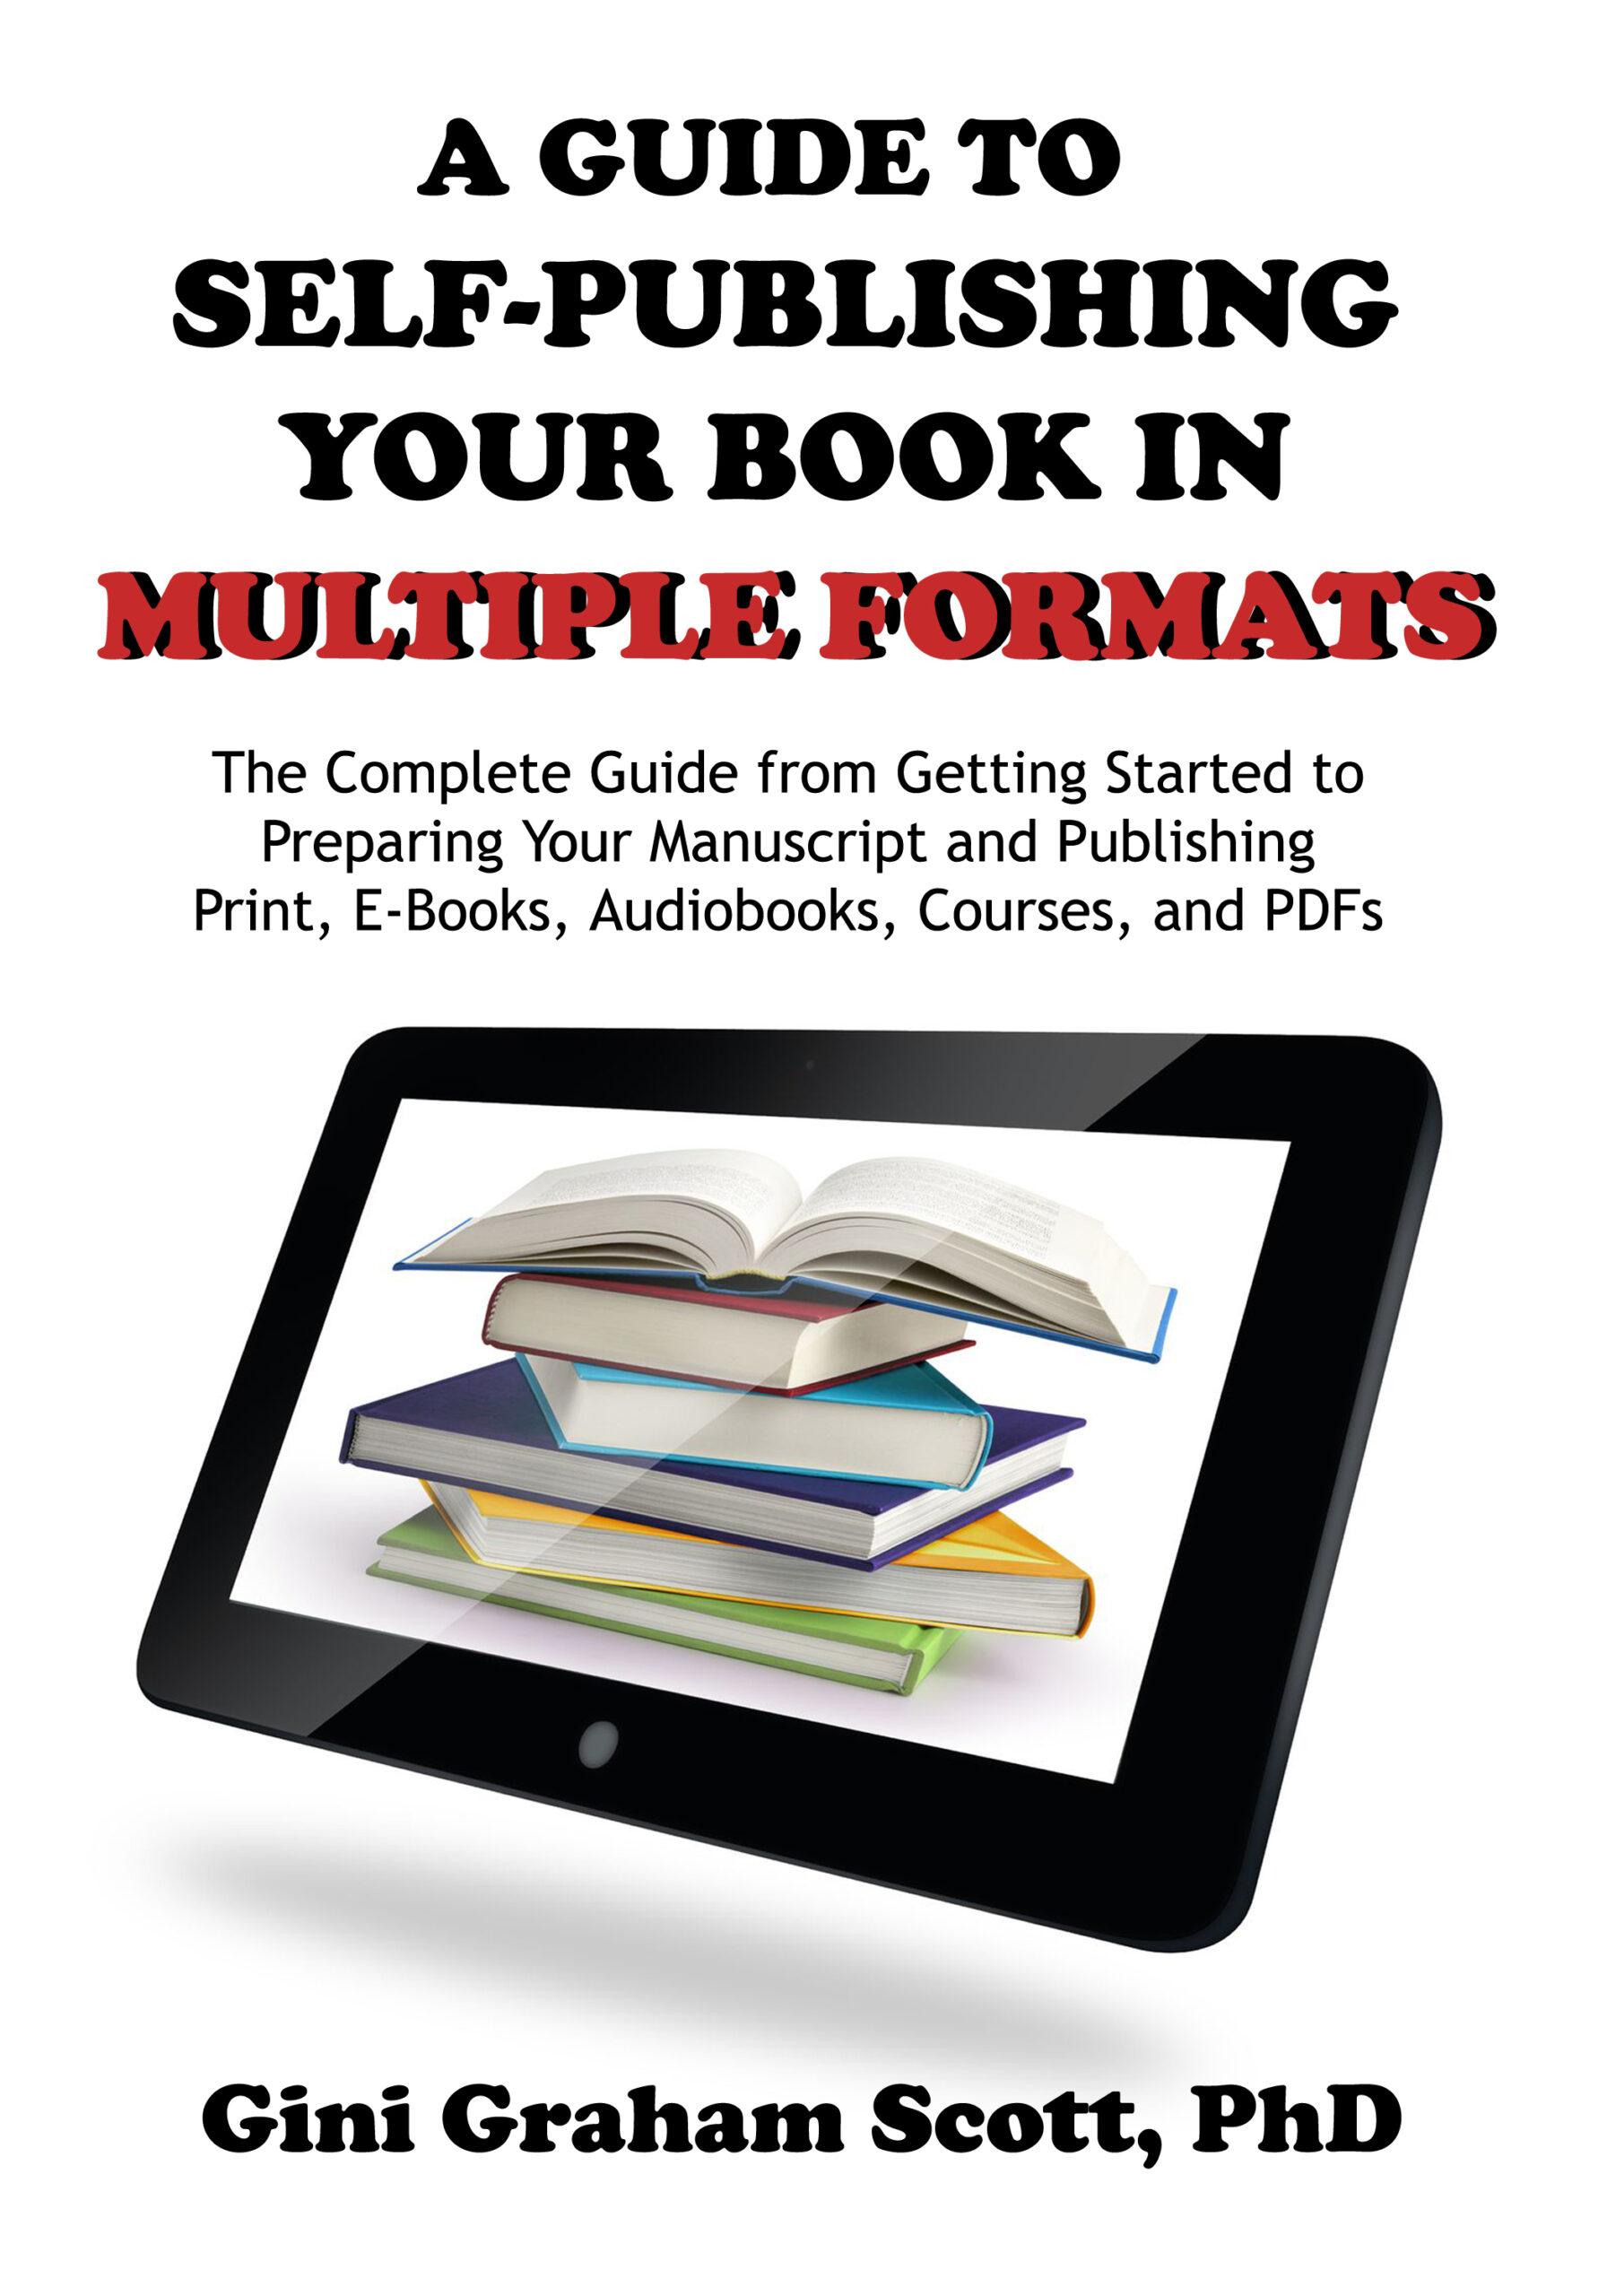 Guide to Self-Publishing 